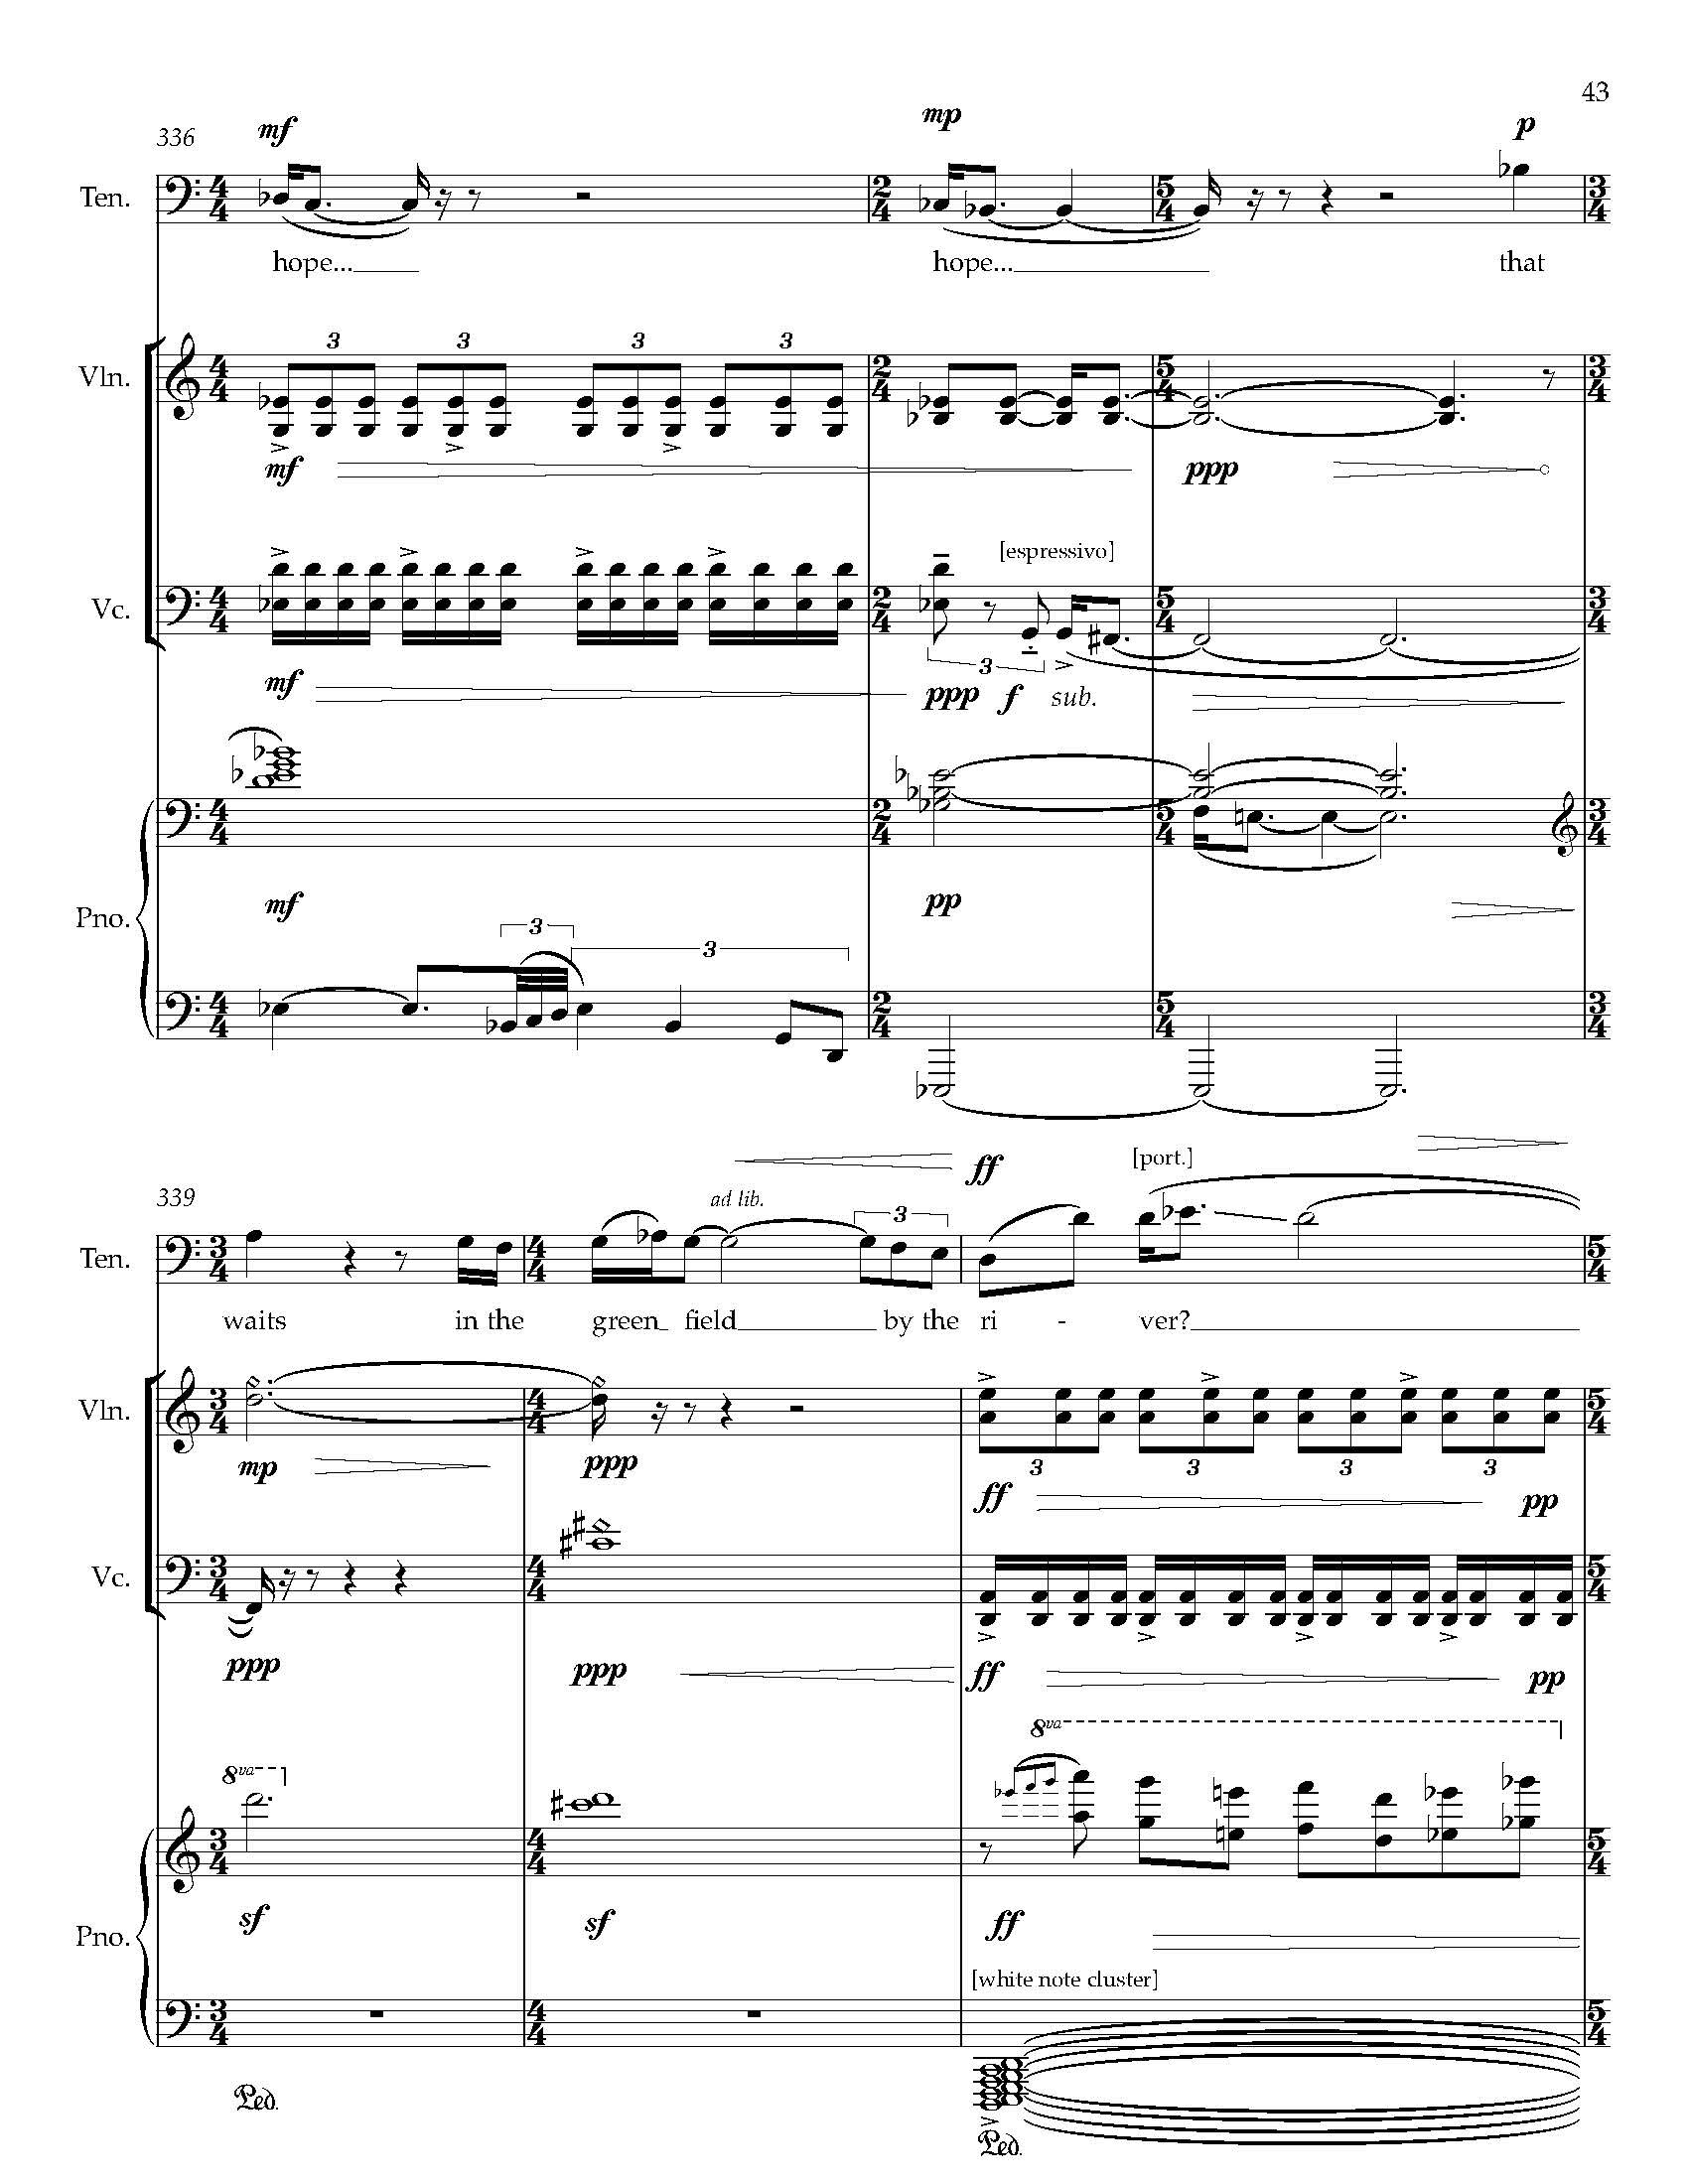 Gursky Songs - Complete Score_Page_51.jpg